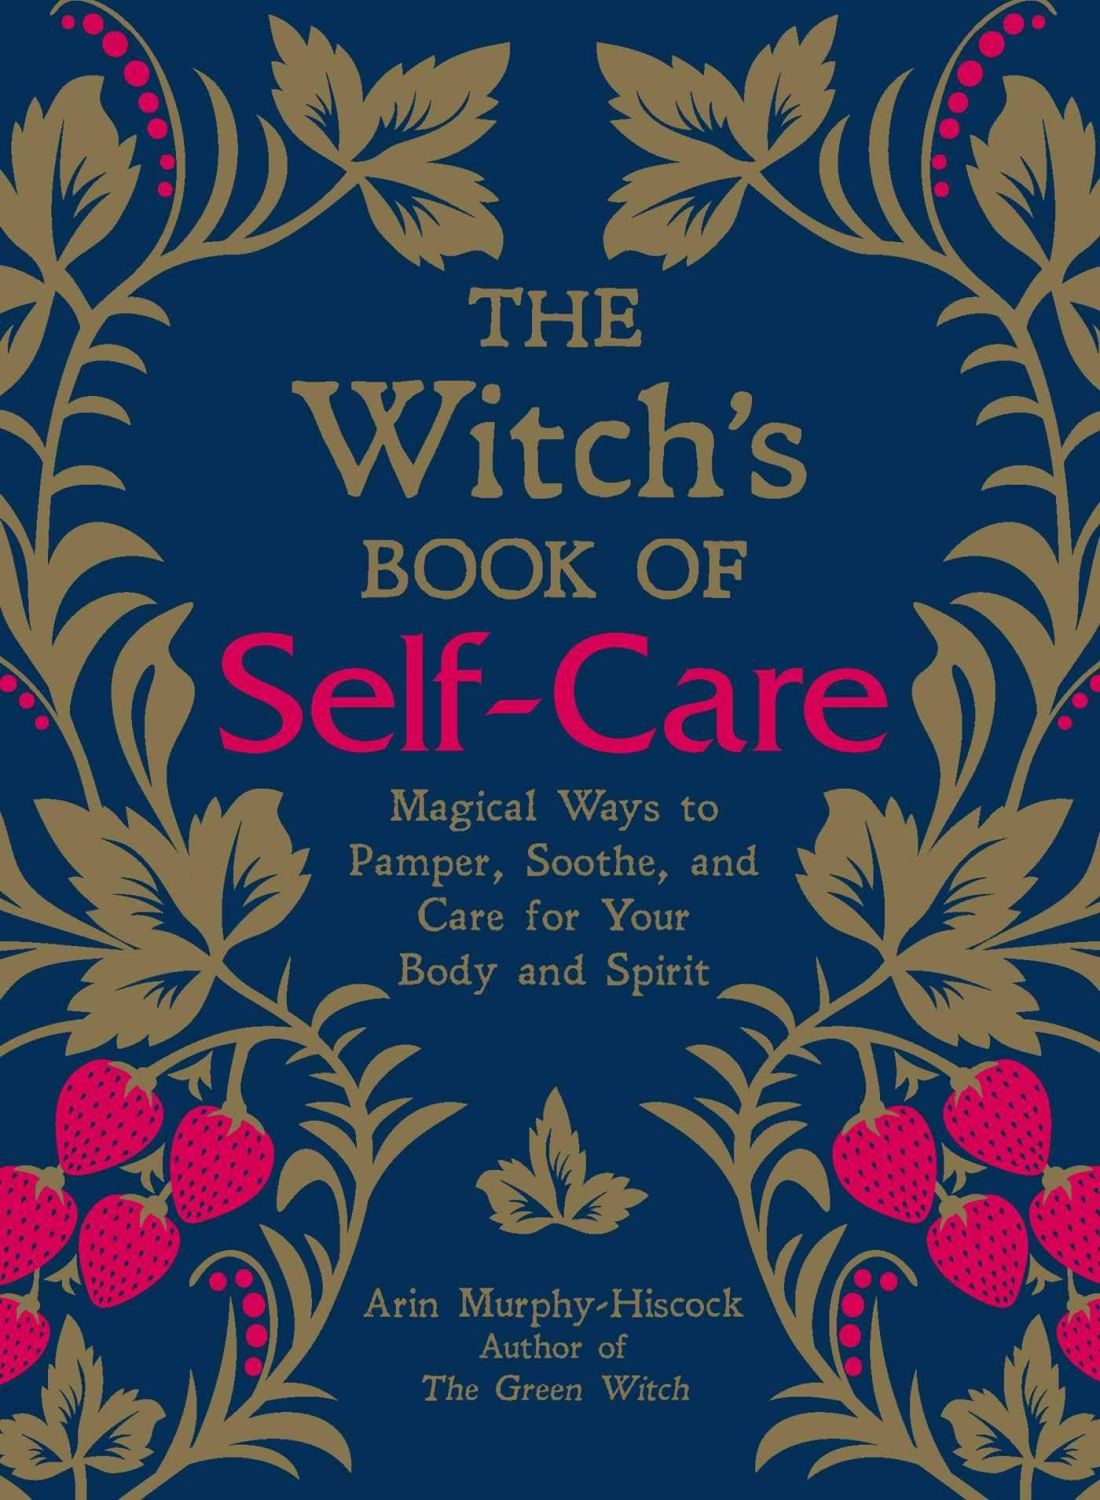 The Witch's Book of Self Care by Arin Murphy-Hiscock